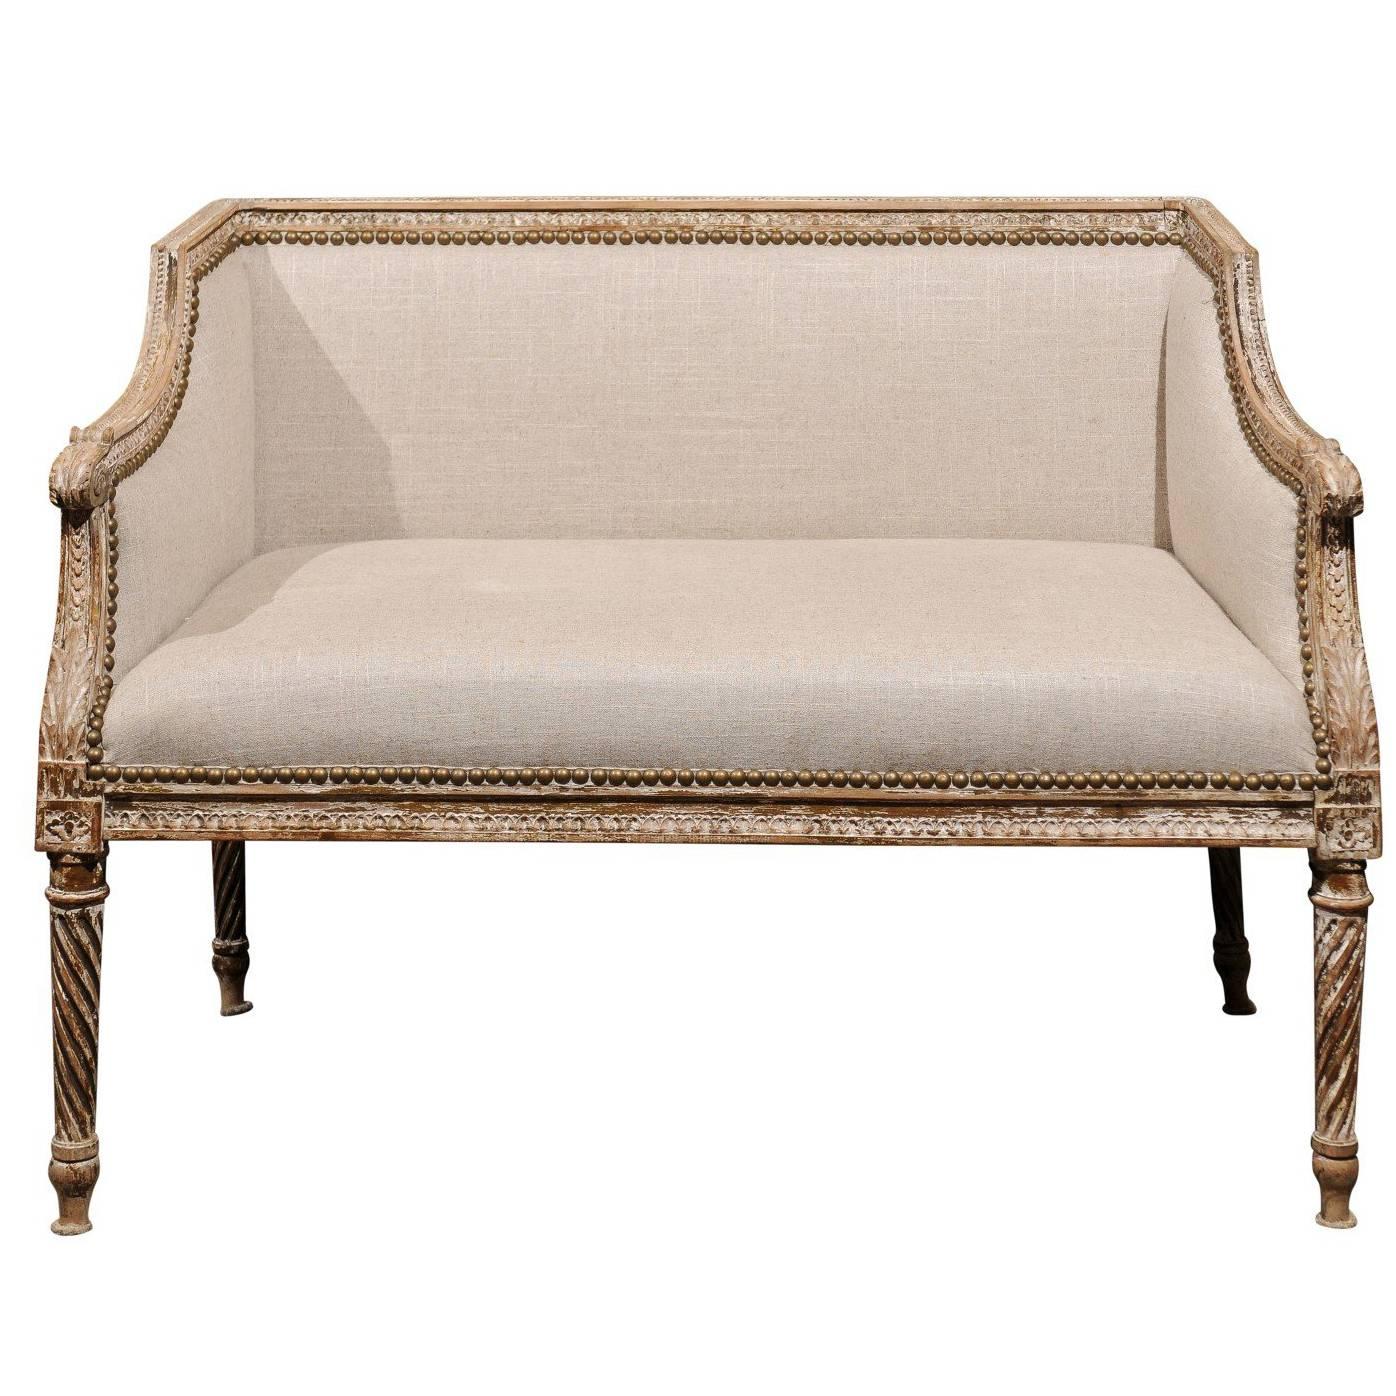 Petite 1820-1840 French Louis XVI Style Upholstered Bench with Distressed Finish